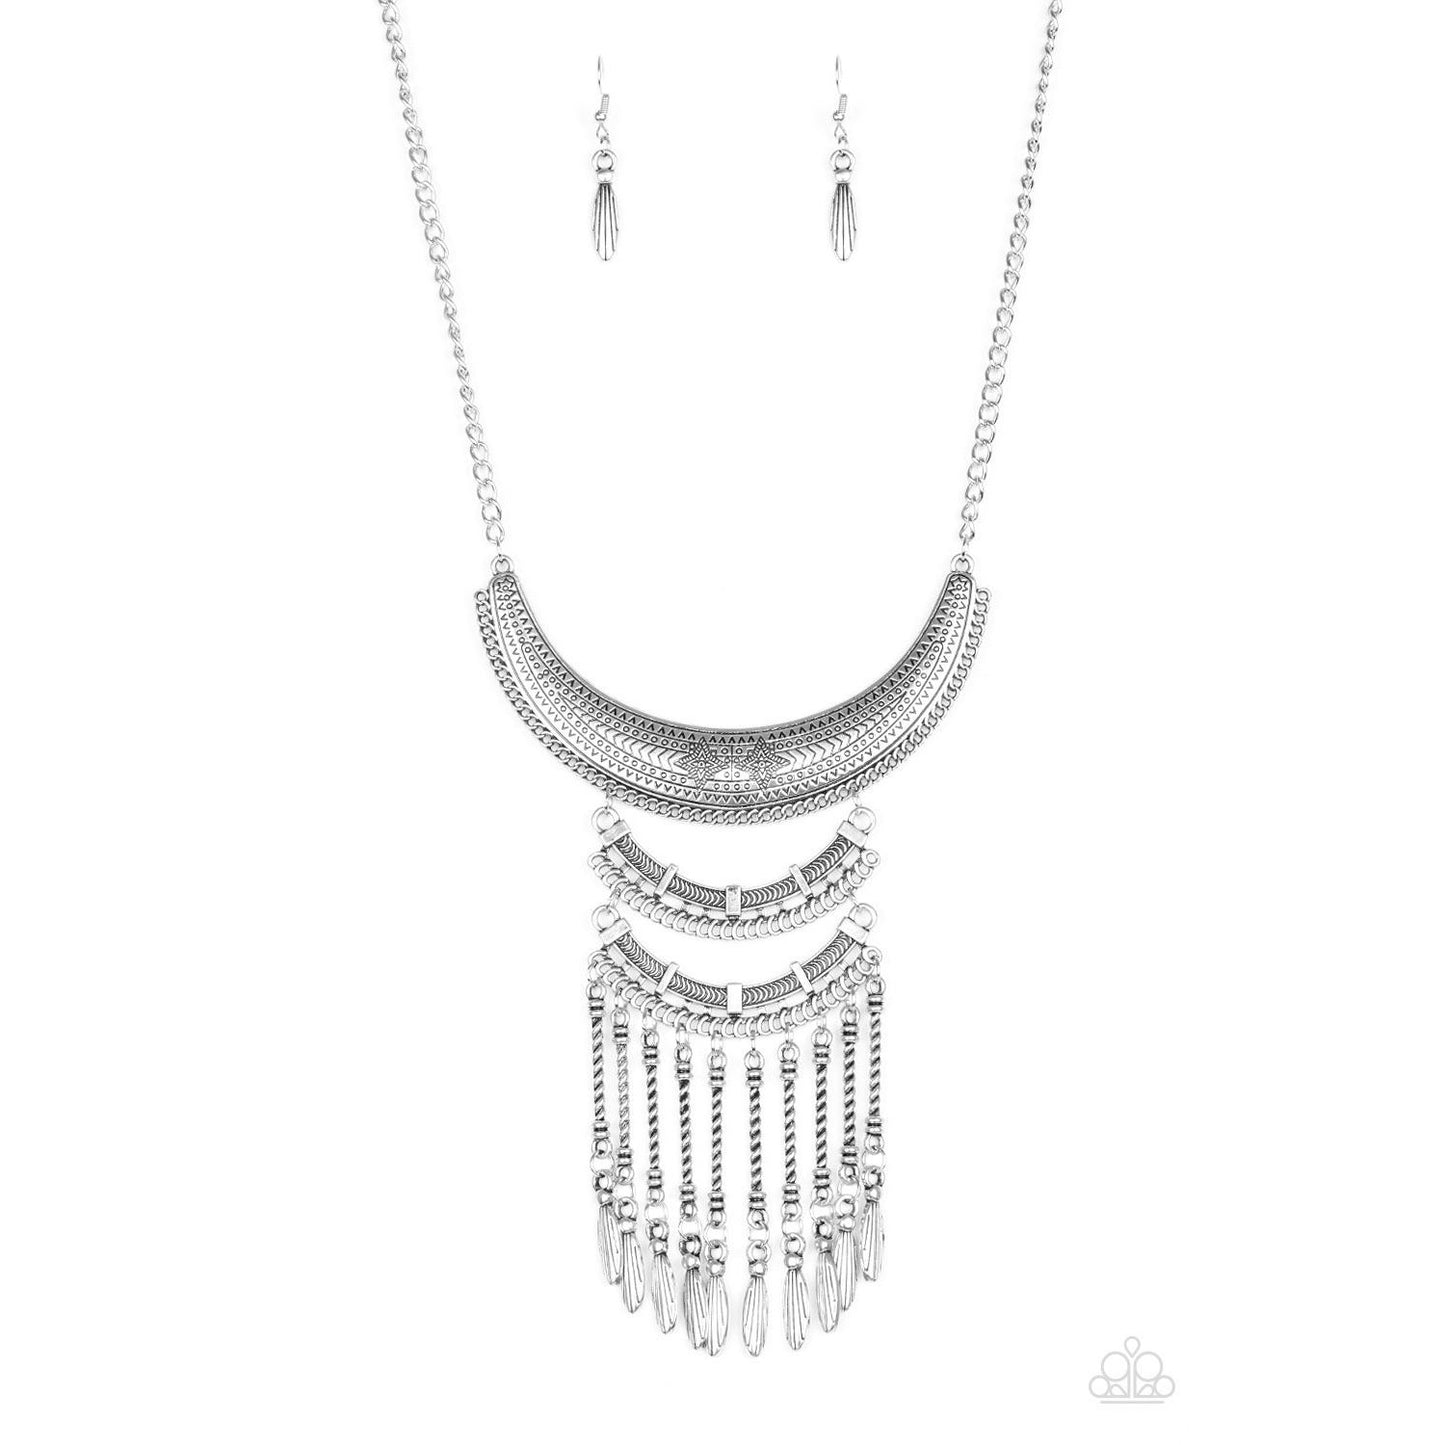 Eastern Empress – Silver Necklace 2006